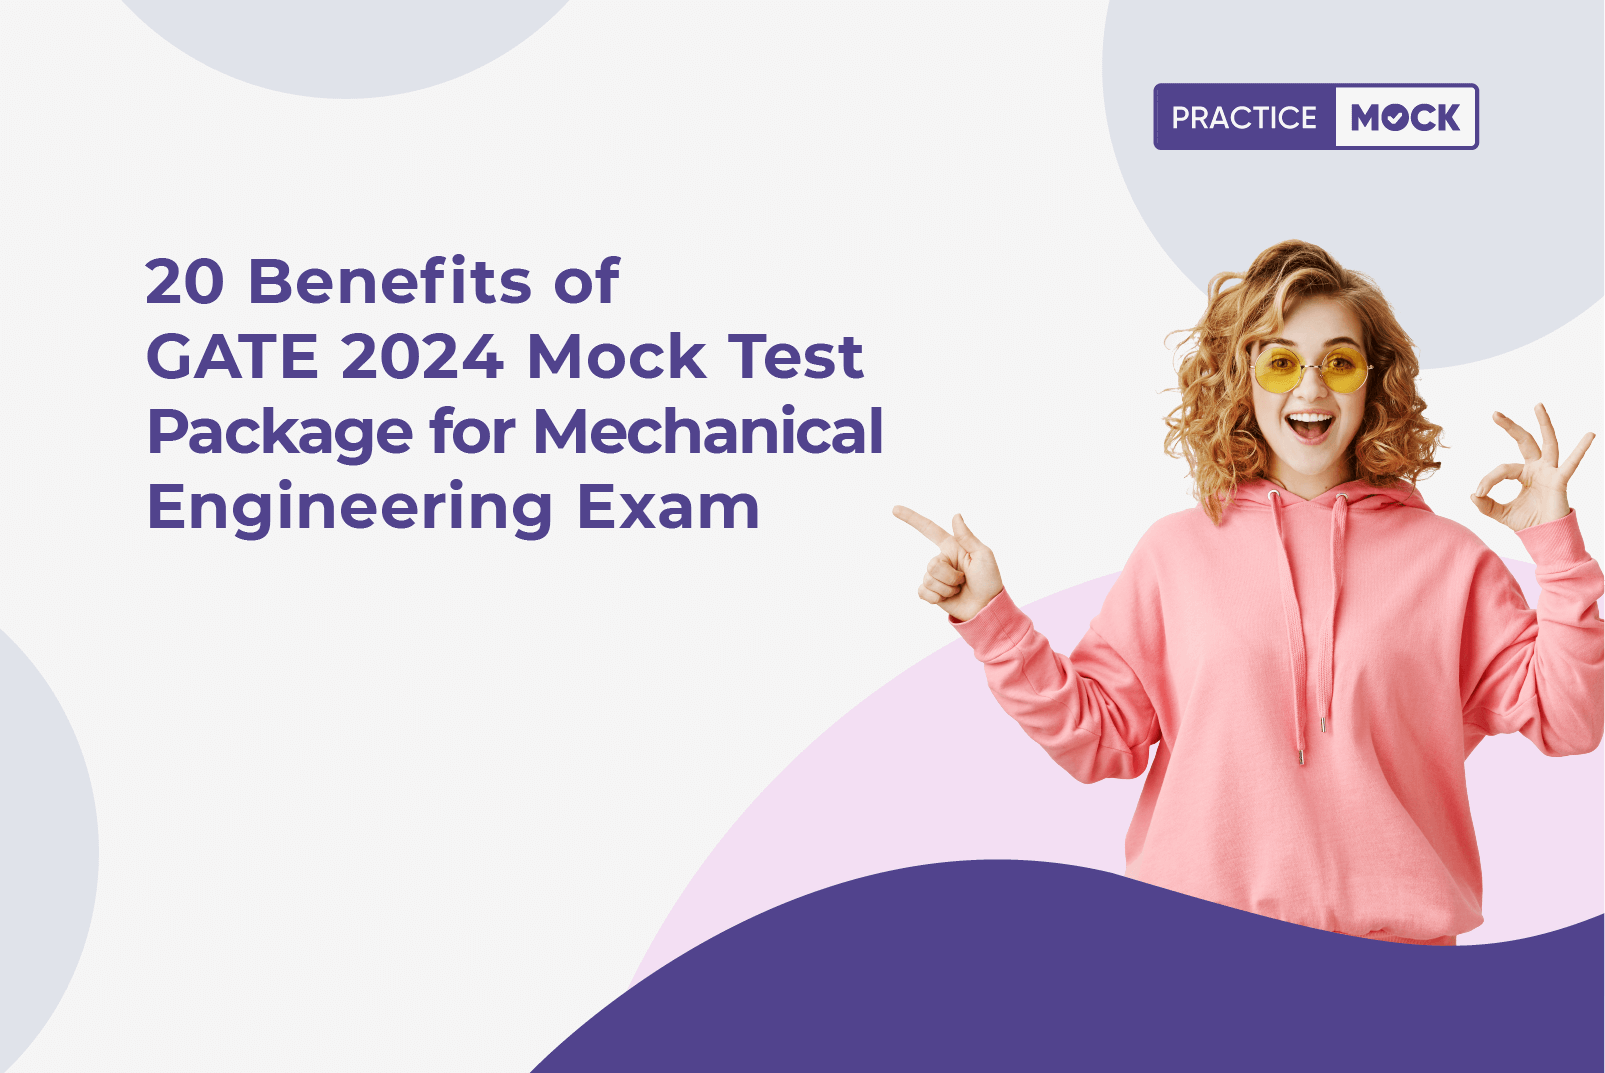 20 Benefits of GATE 2024 Mock Test Package for Mechanical Engineering Exam Success